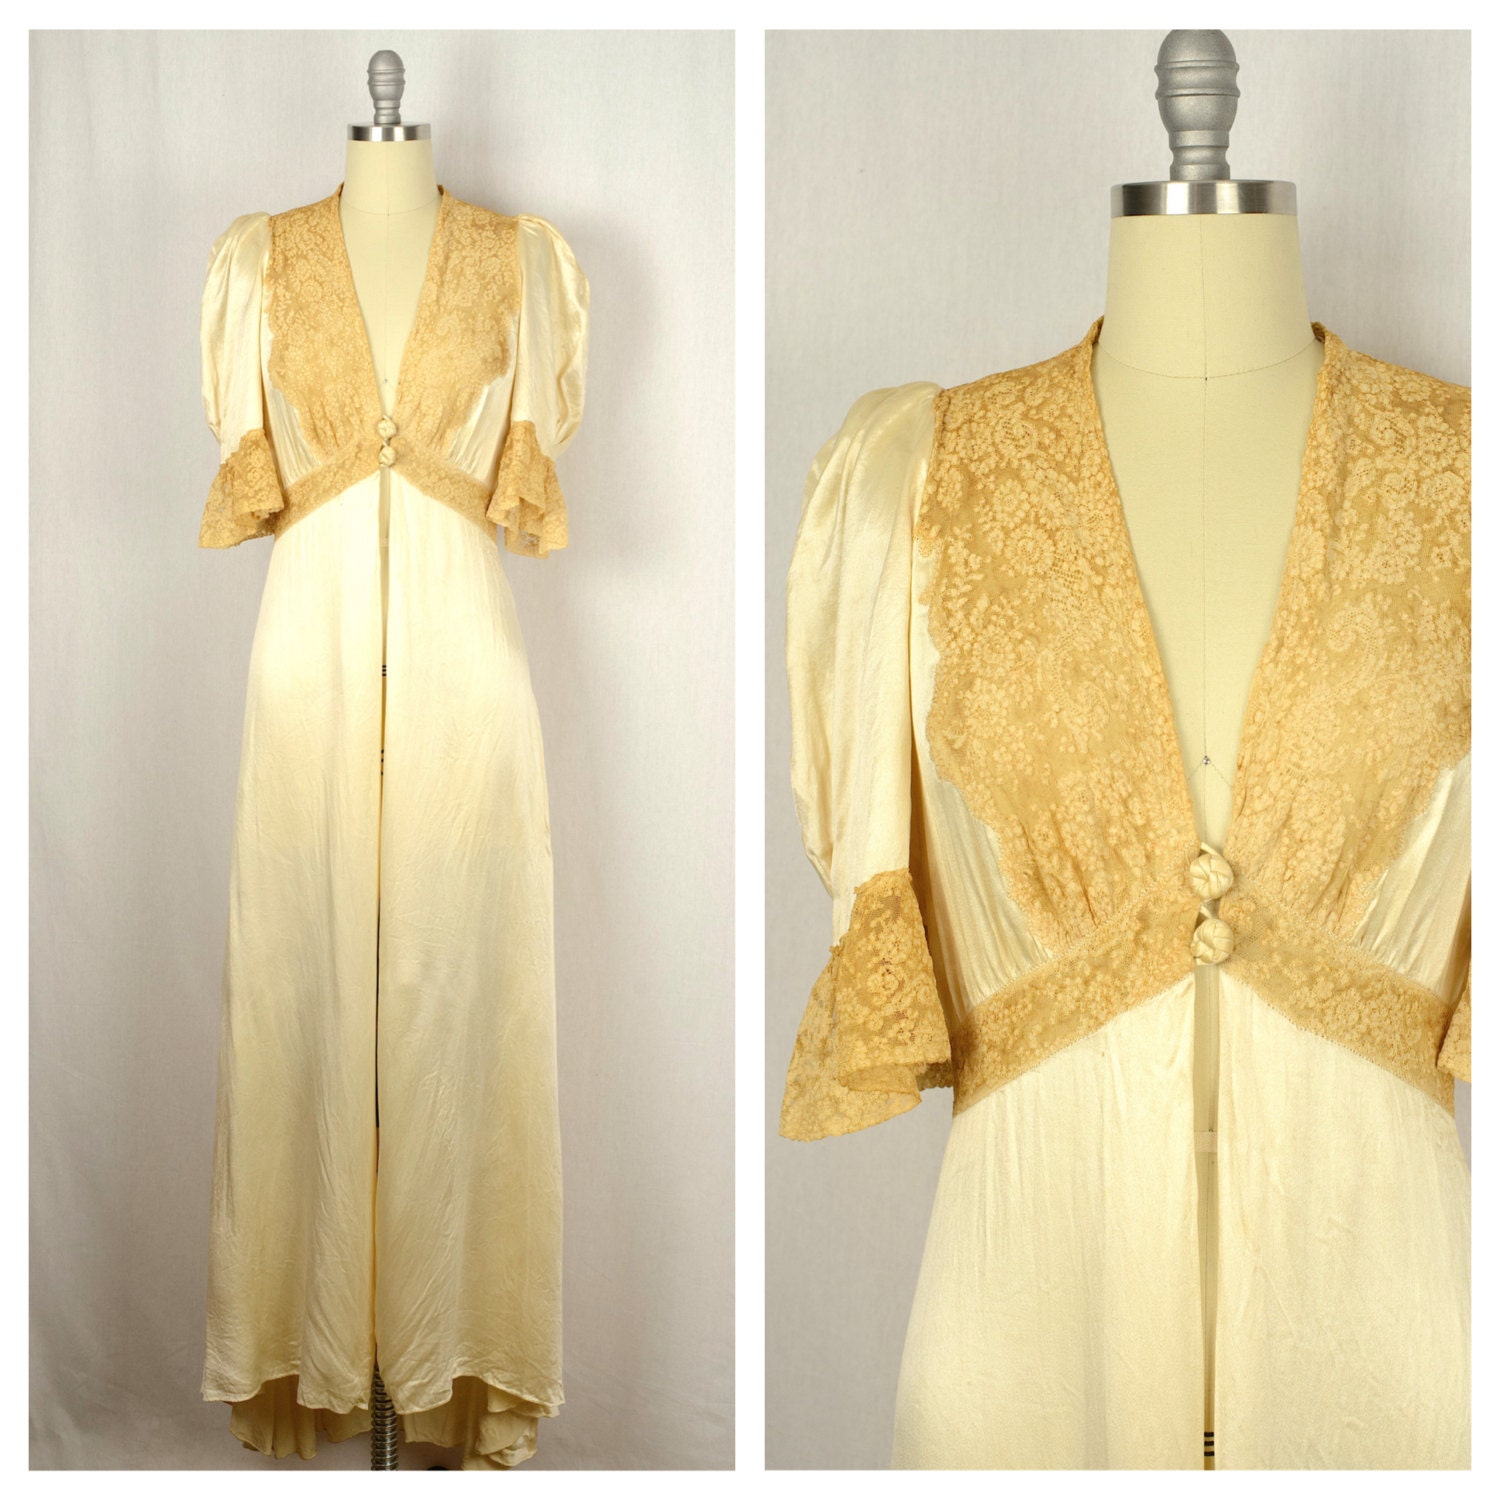 Vintage 1930s Robe / 30s Champagne Hollywood Satin and Lace